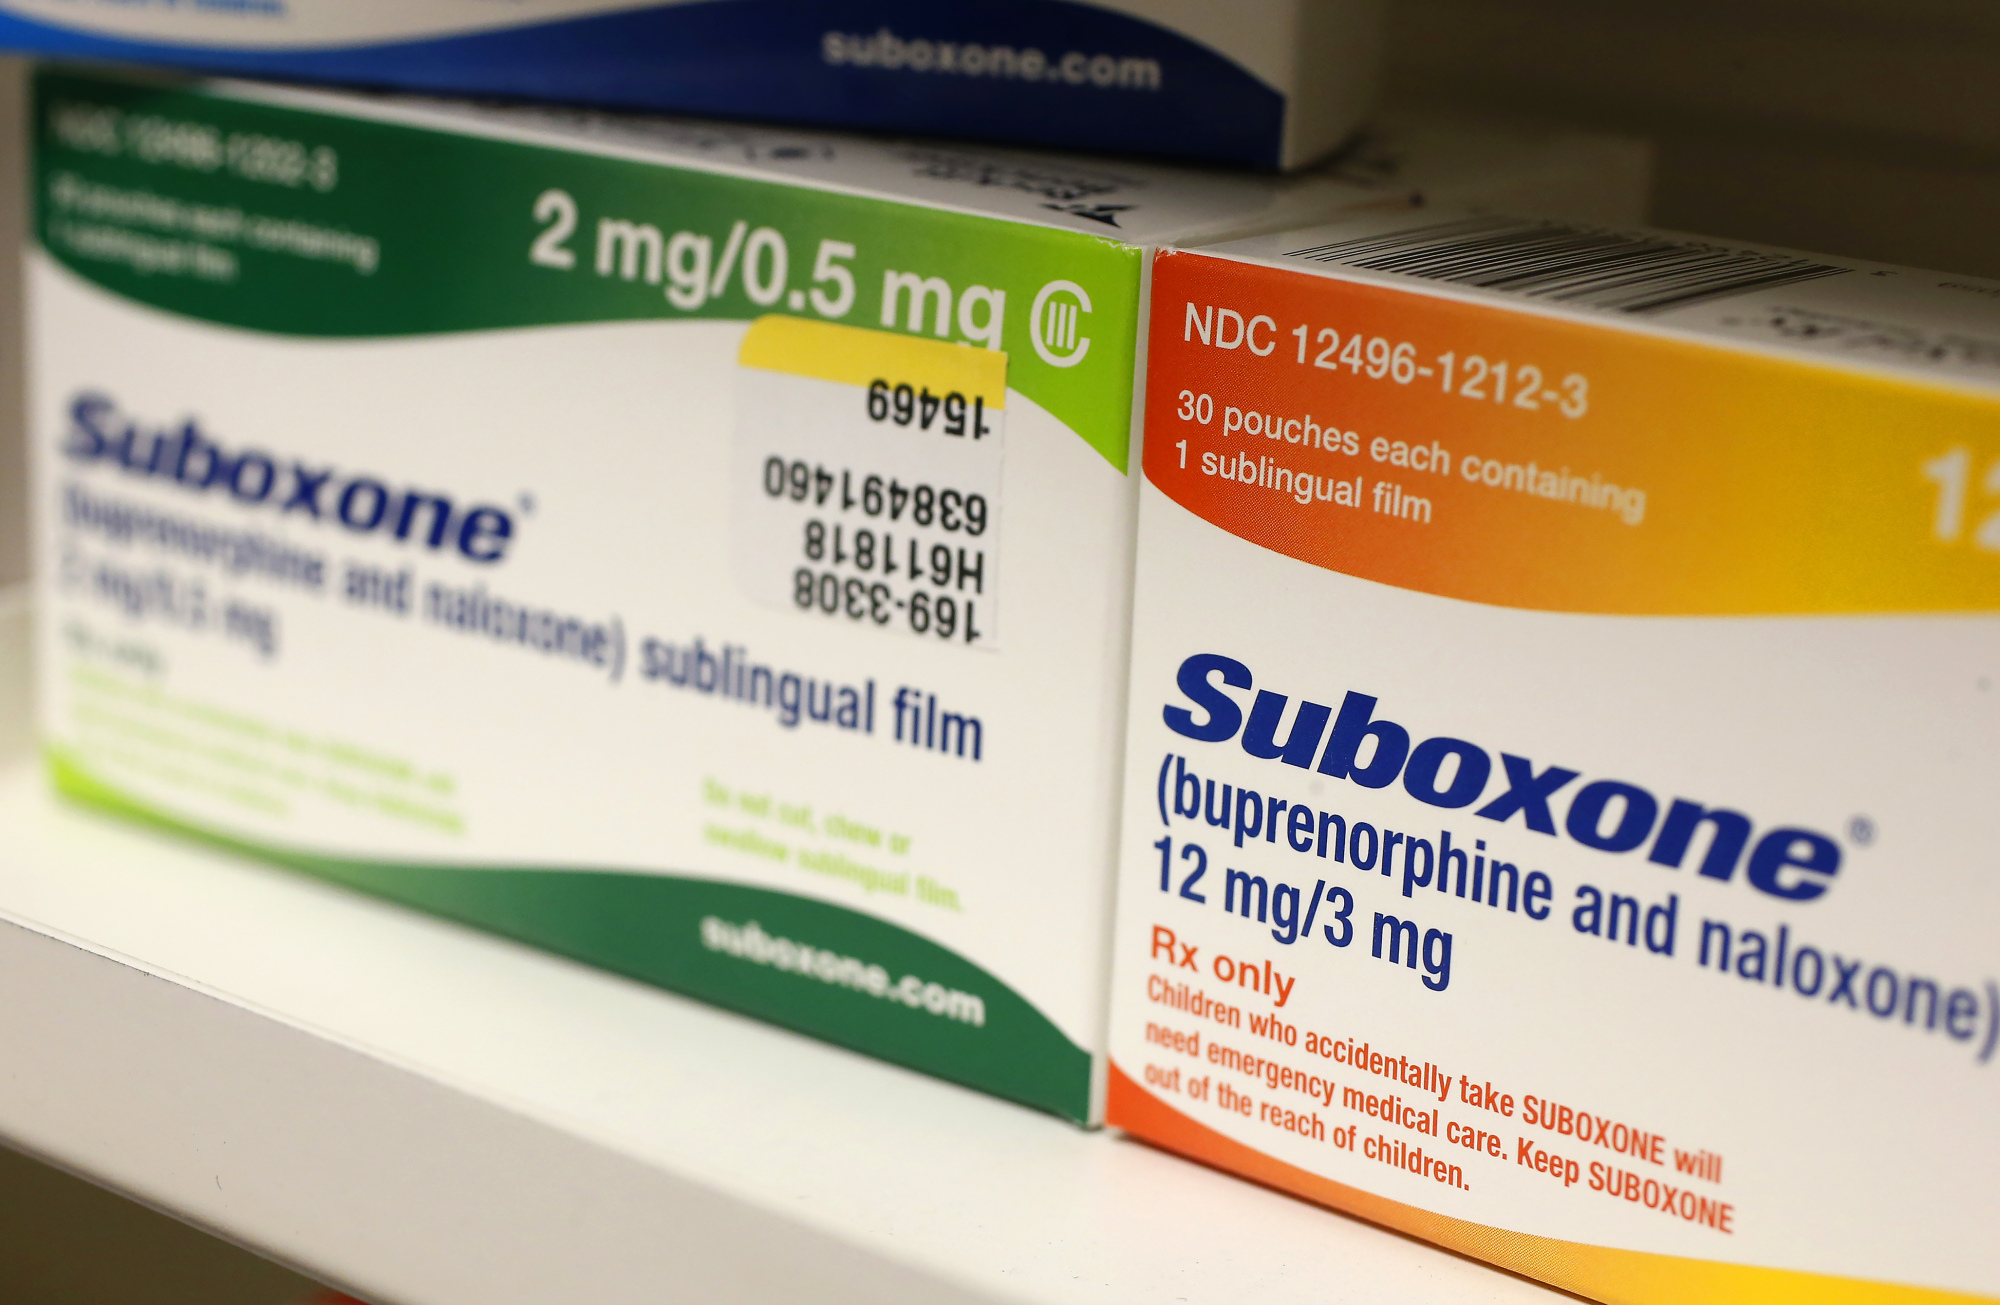 Novo Detox LA| Suboxone medication, which is used to treat narcotic (opiate) addiction